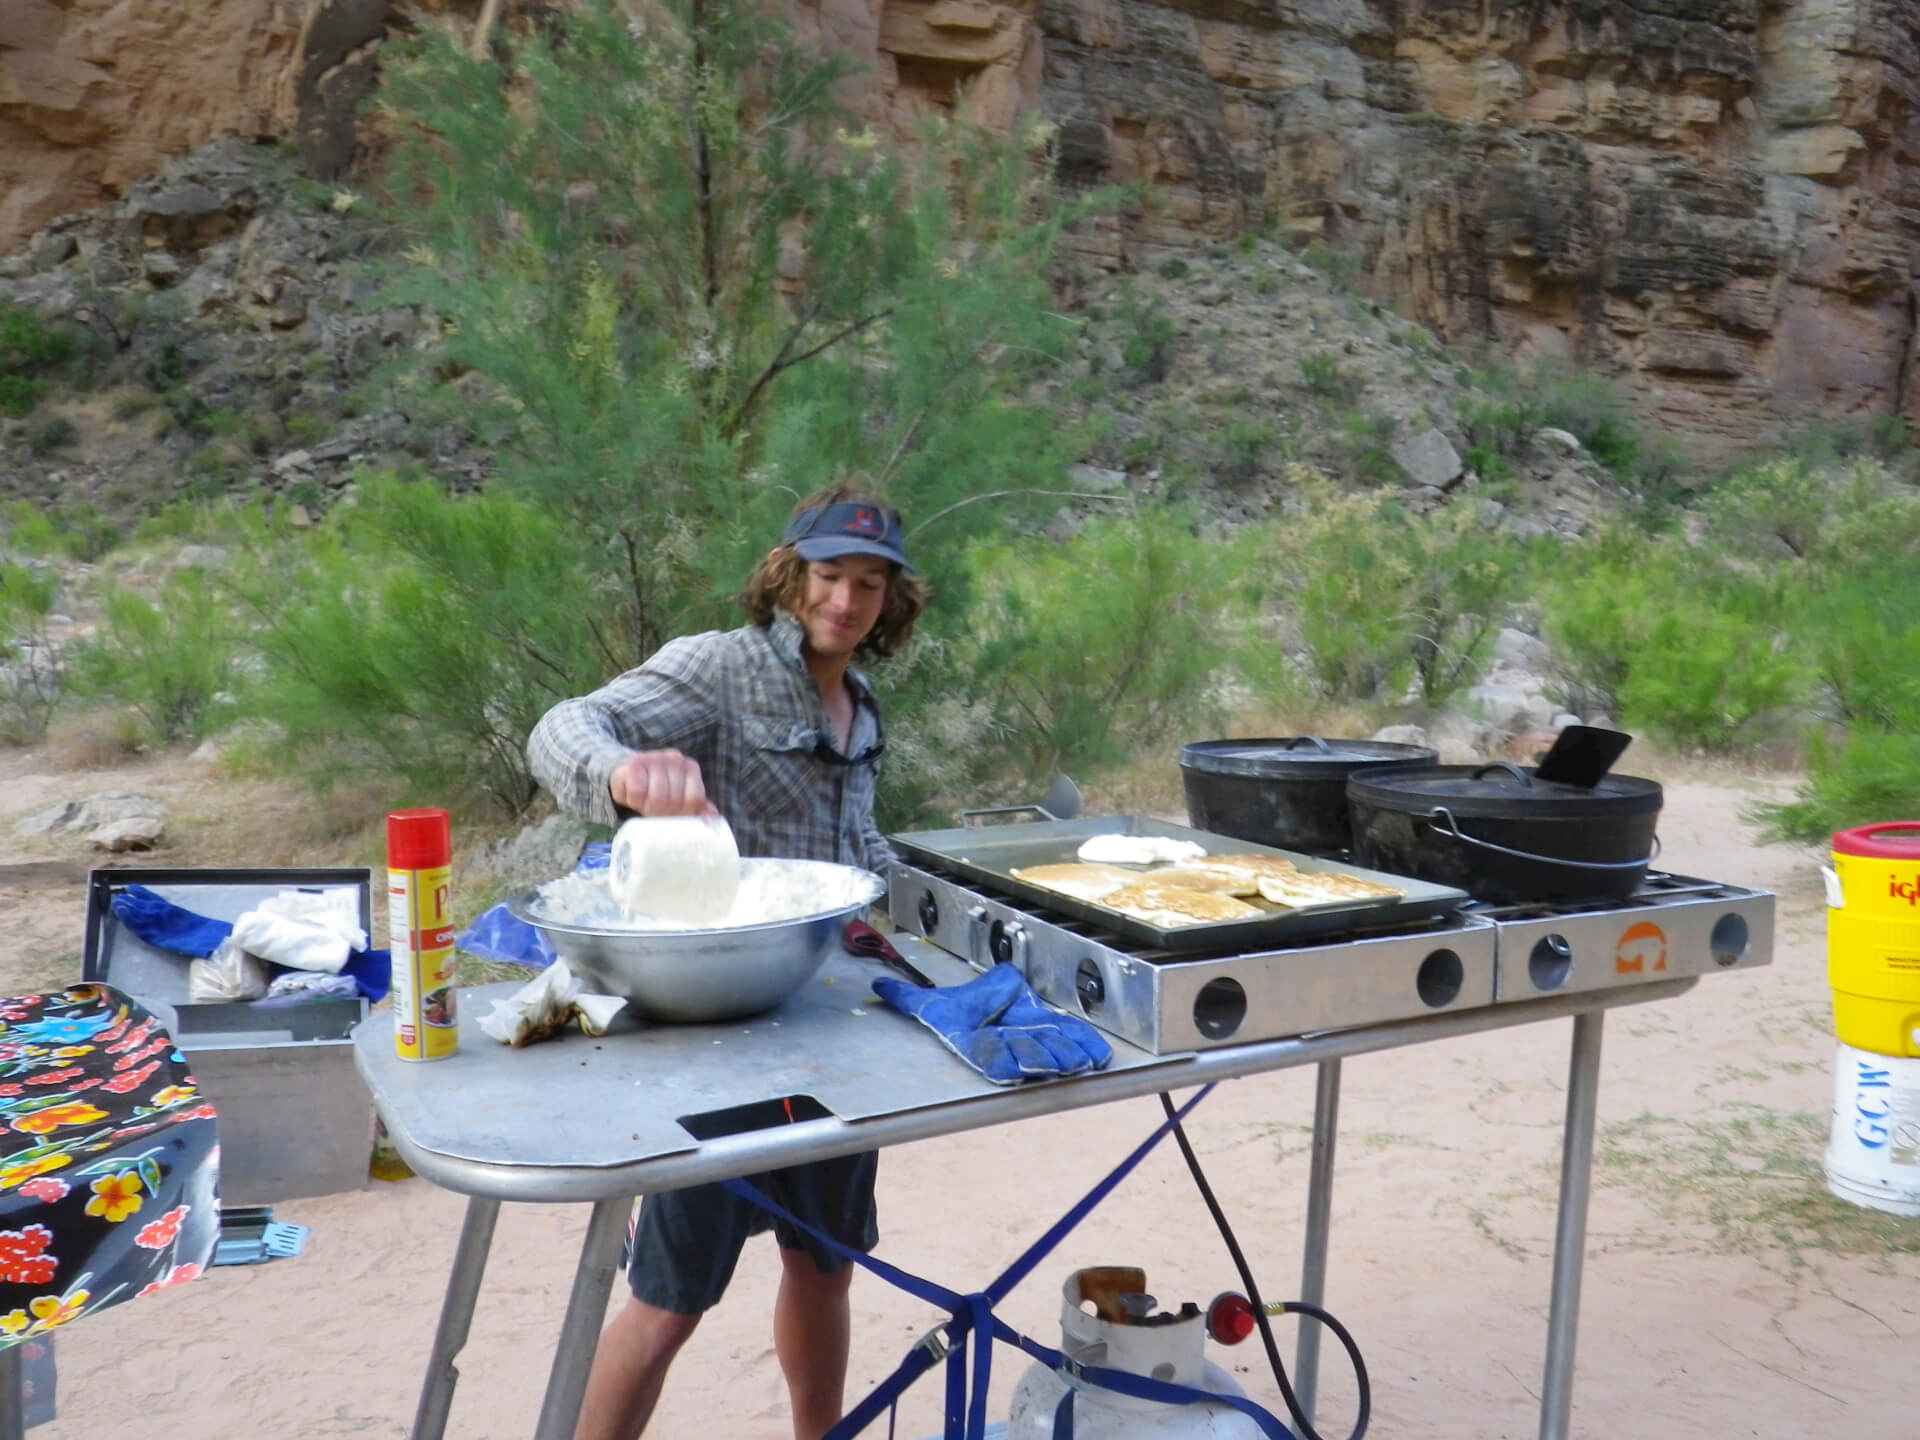 Zach, a Grand Canyon Whitewater guide, prepares pancakes in a river kitchen.